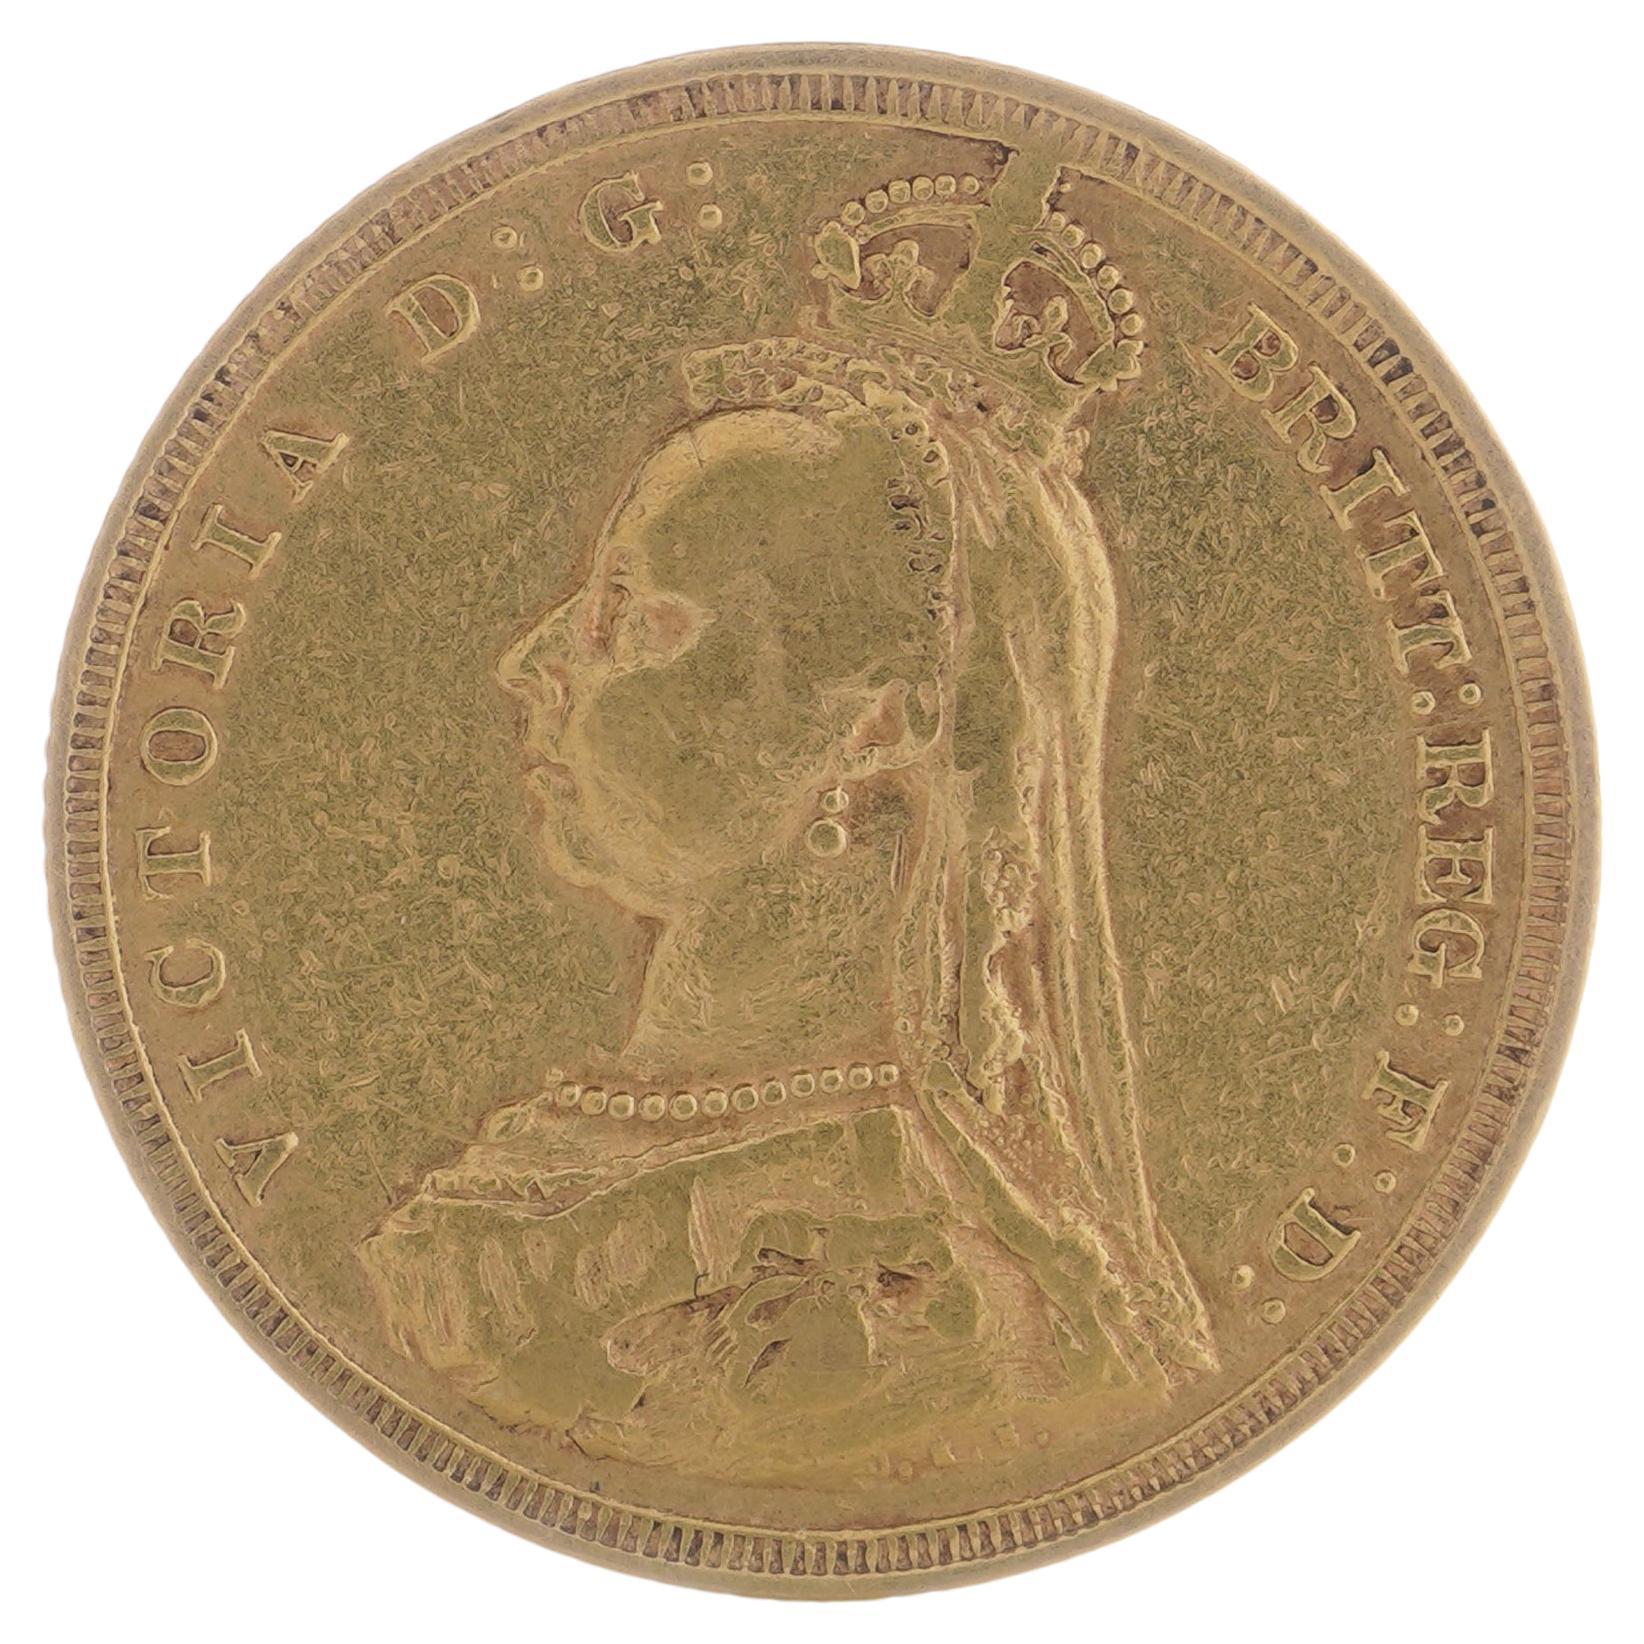 1888 gold Sovereign with the Jubilee portrait of Queen Victoria